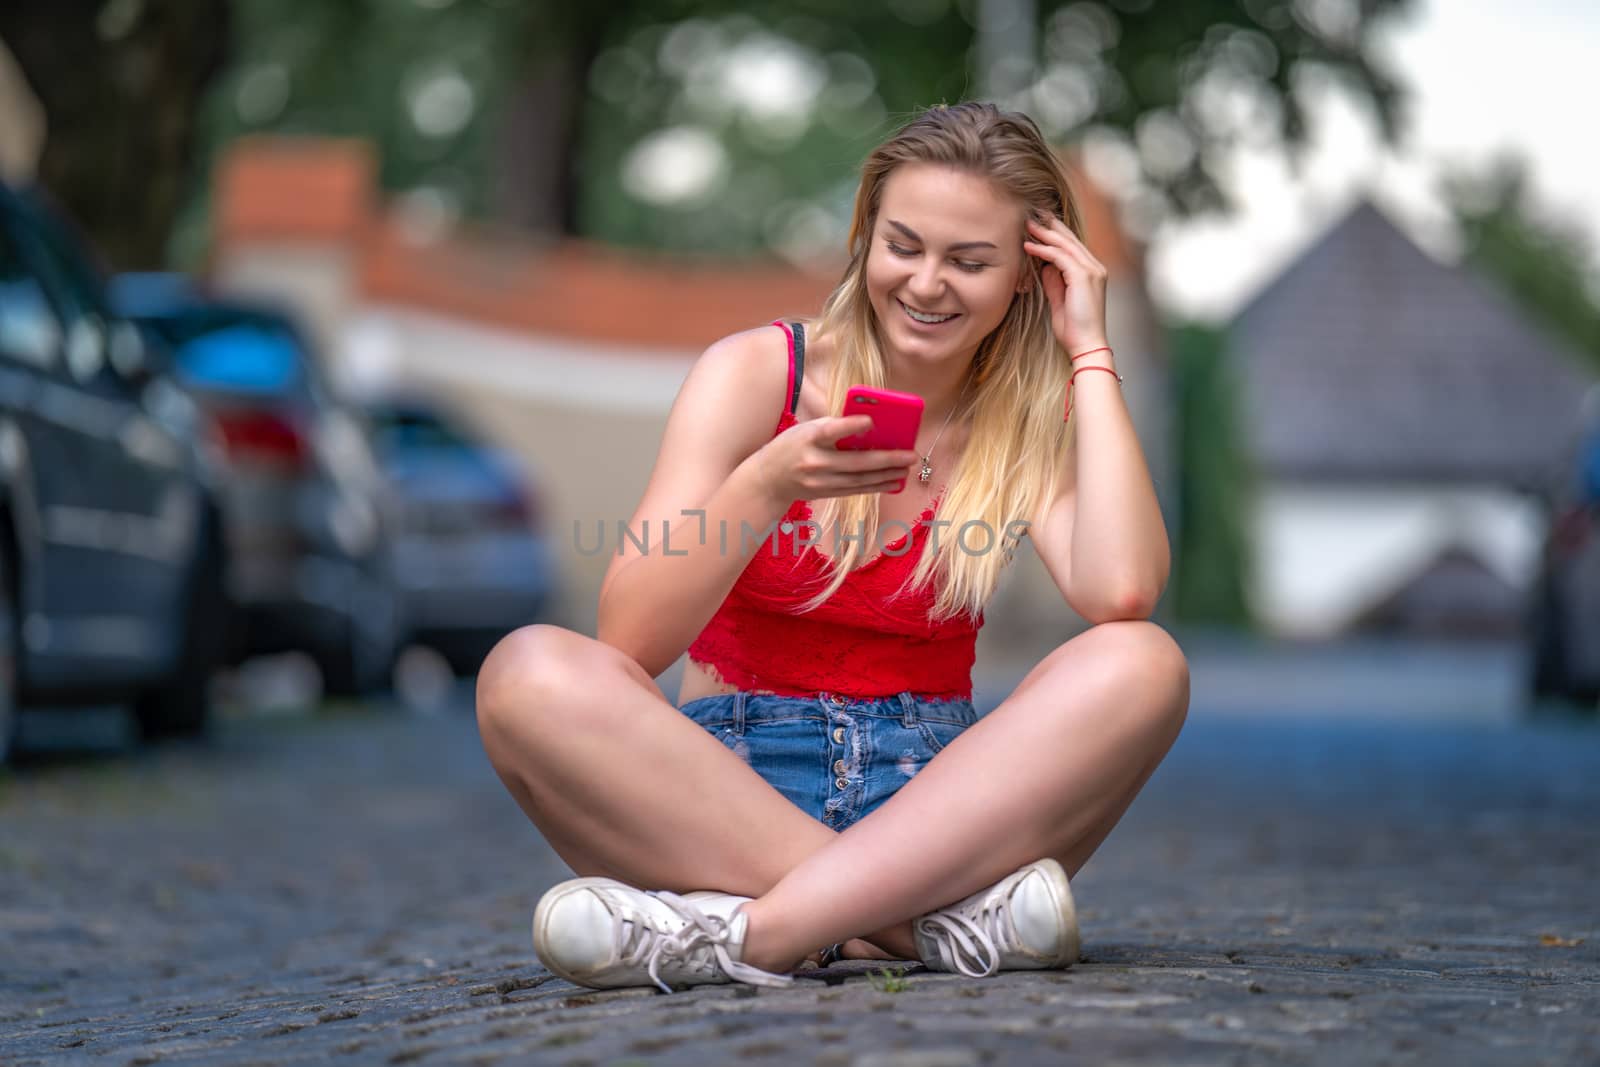 portrait of a beautiful young woman sitting on the pavement in the city streets using a smartphone.